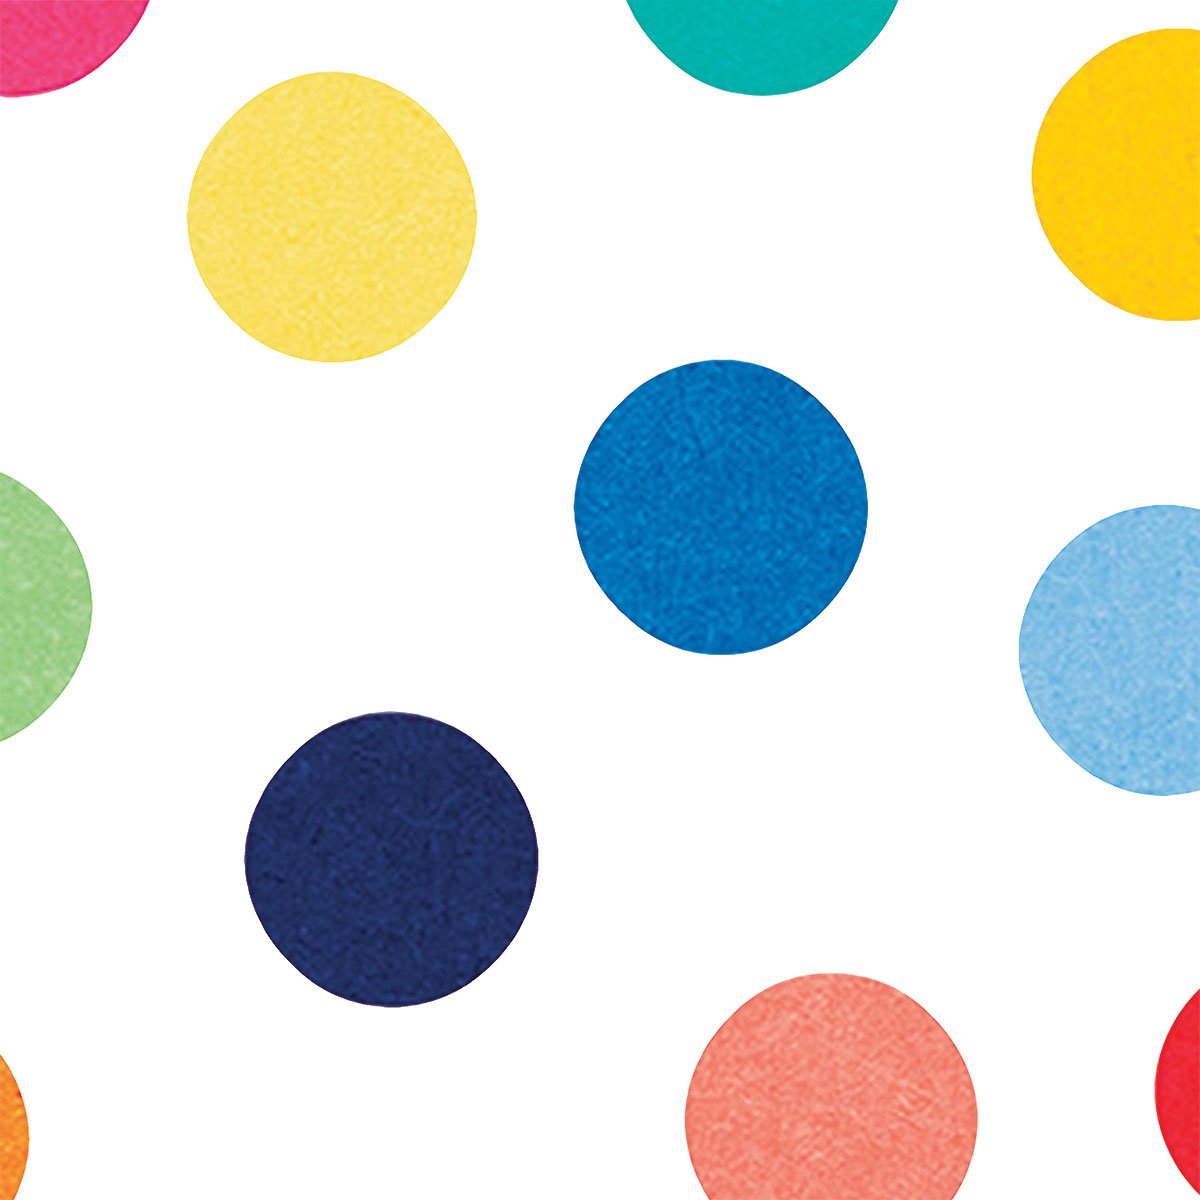 https://www.ozscapedesigns.com/wp-content/uploads/2022/12/big-colorful-polka-dot-shower-curtain-pattern.jpg